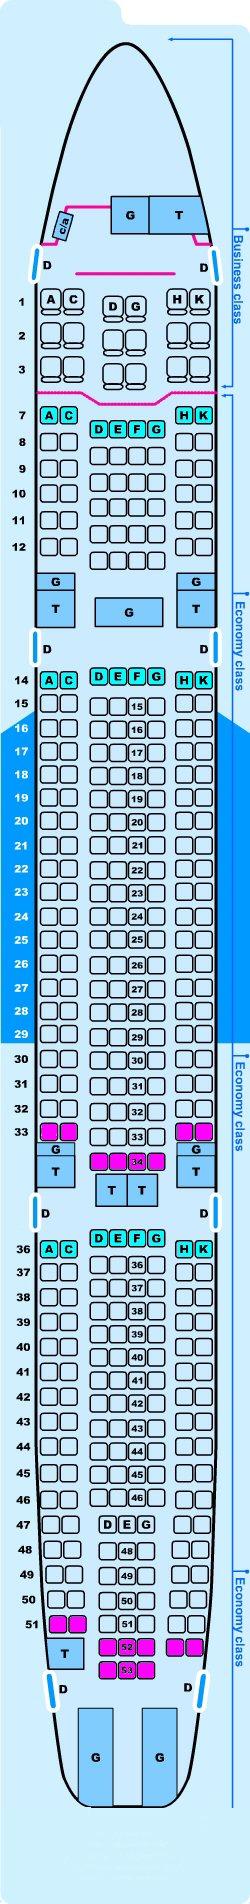 Seat Map Airbus A Finnair Best Seats In The Plane Porn Sex Picture